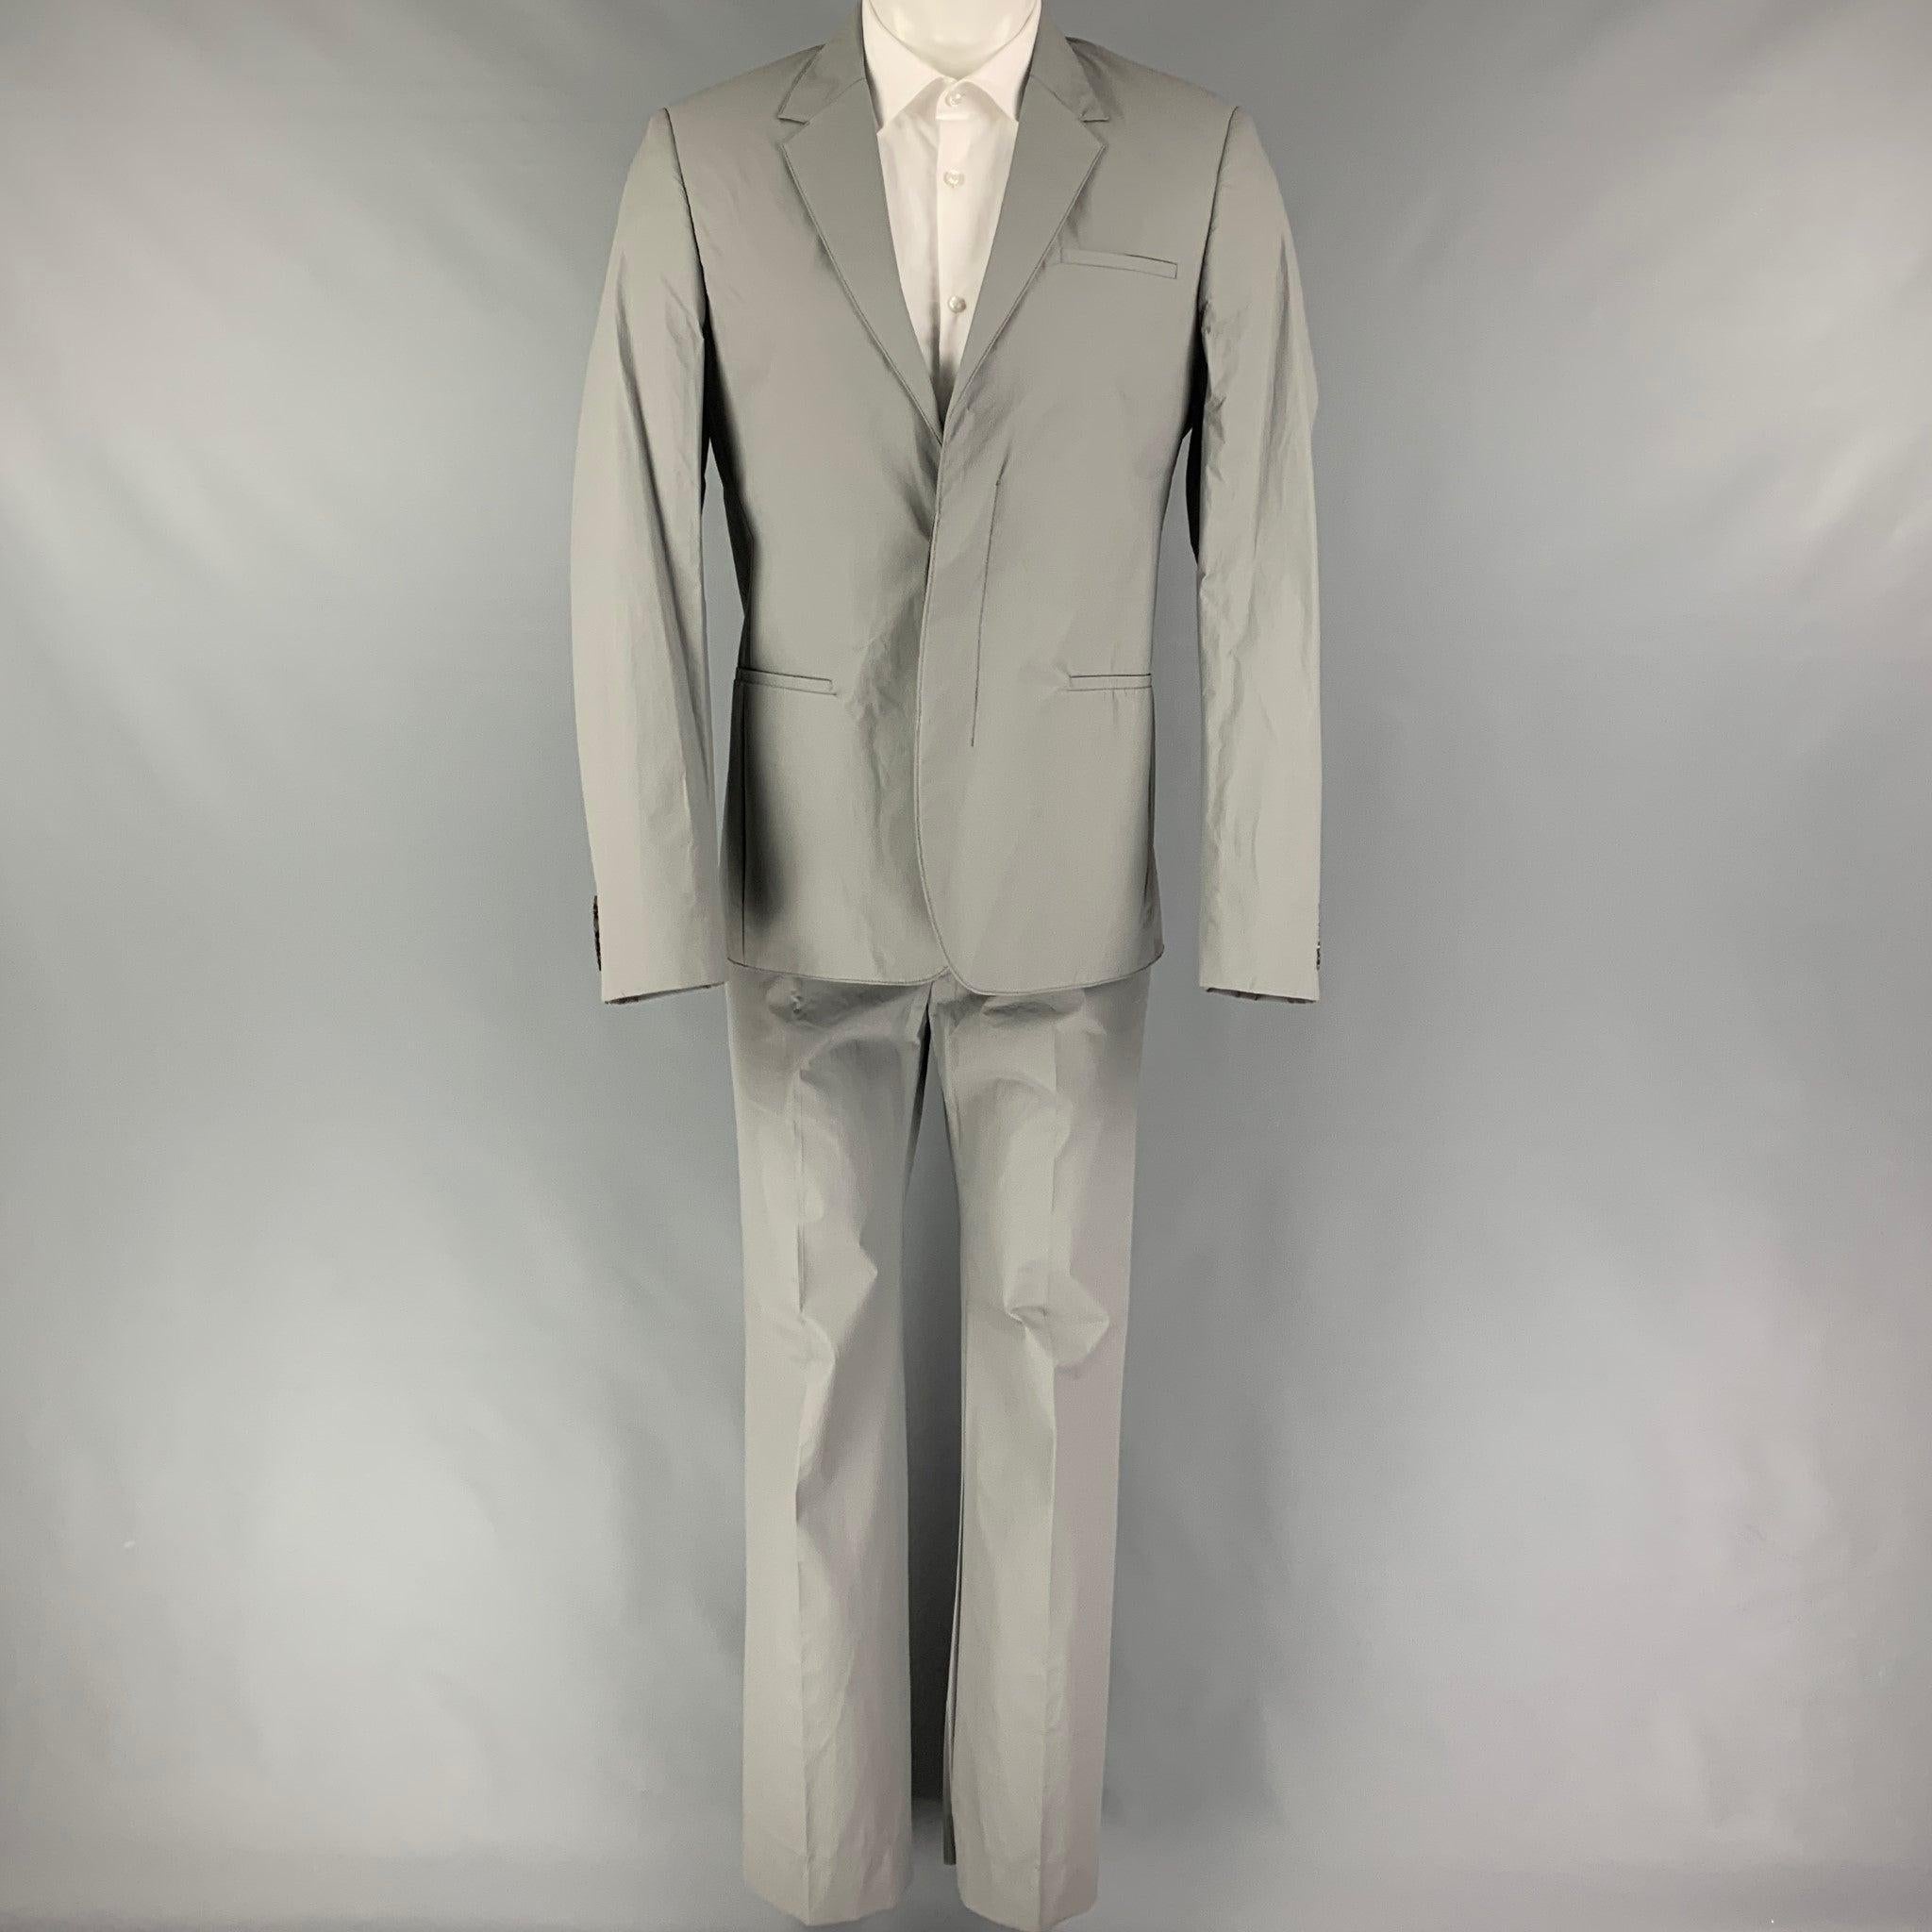 CALVIN KLEIN COLLECTION
suit comes in a grey polyurethane / polyester with a full liner and includes a single breasted, double button sport coat with a notch lapel and matching flat front trousers. Made in Italy. New With Tags.  

Marked:   48/38